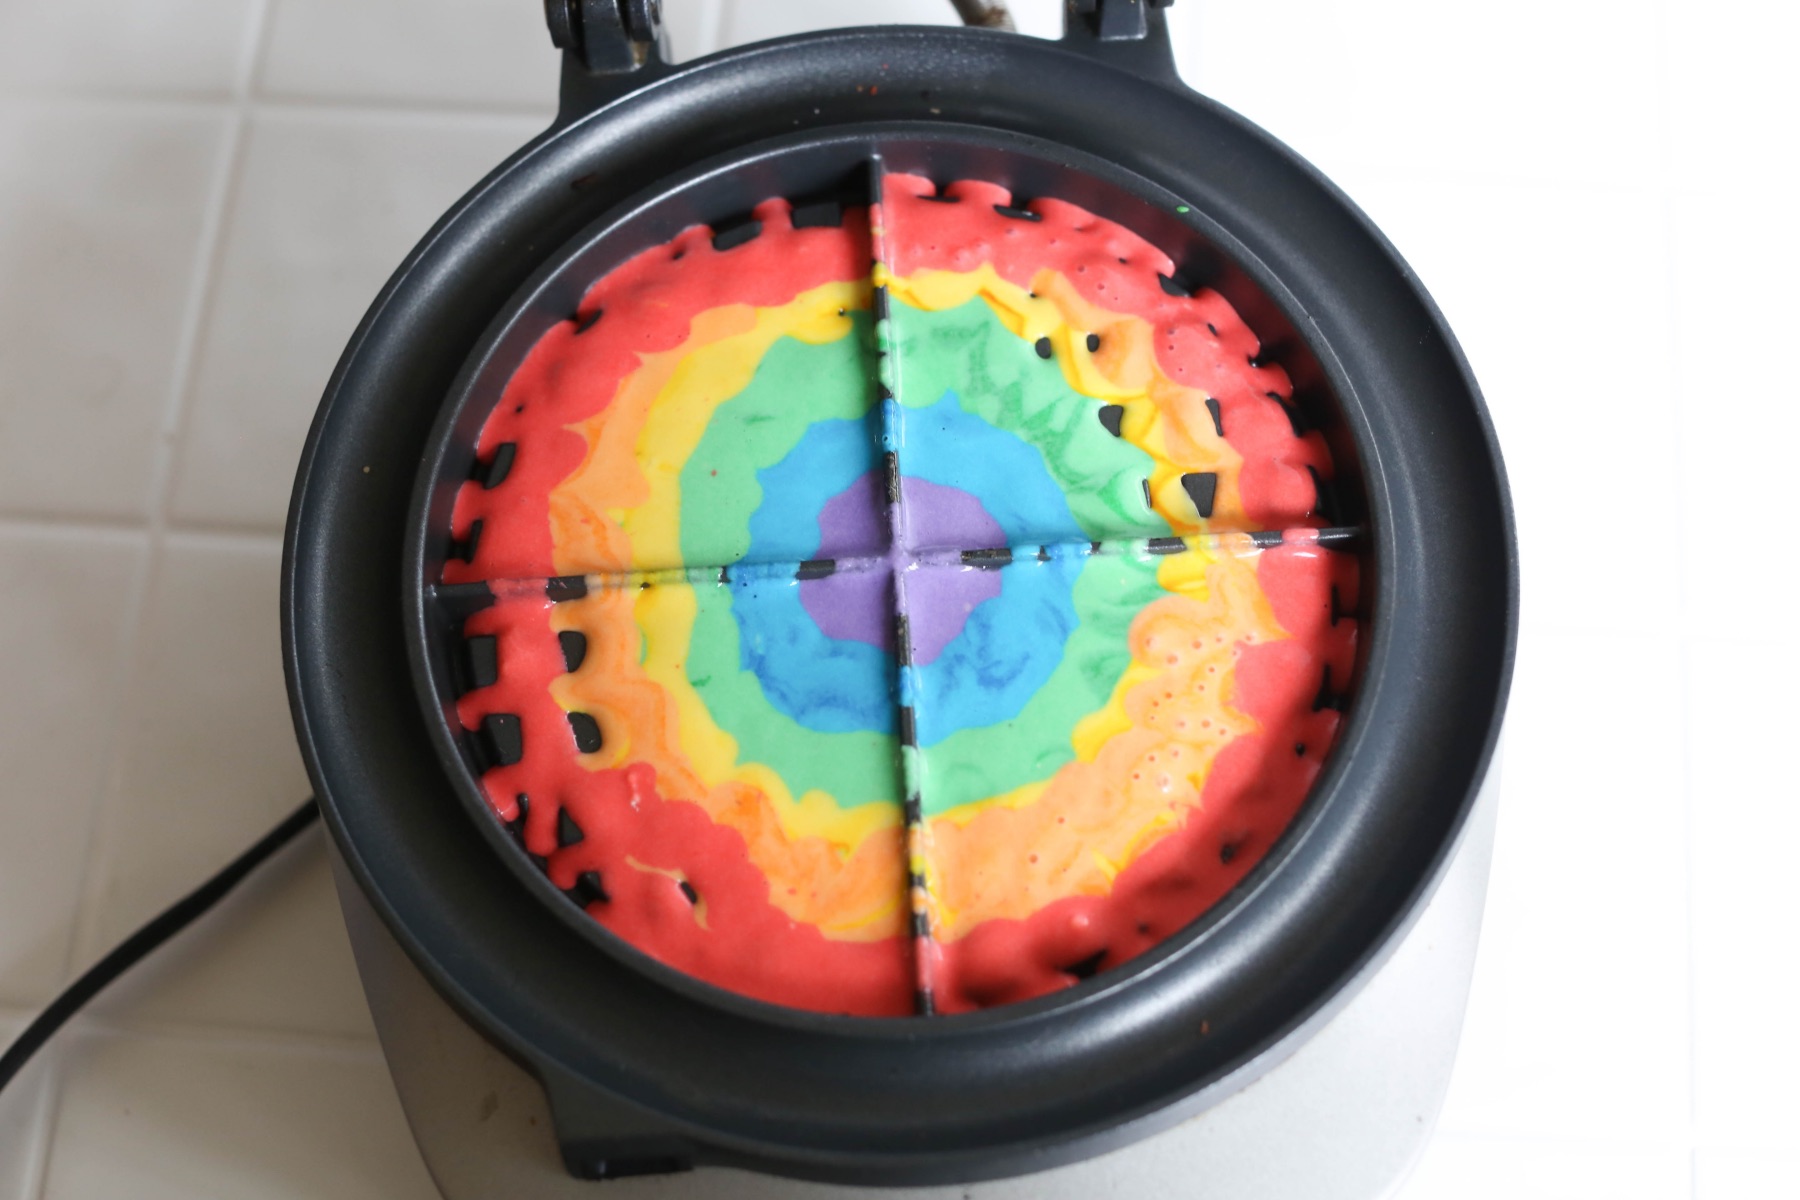 add the rainbow colors to a waffle iron